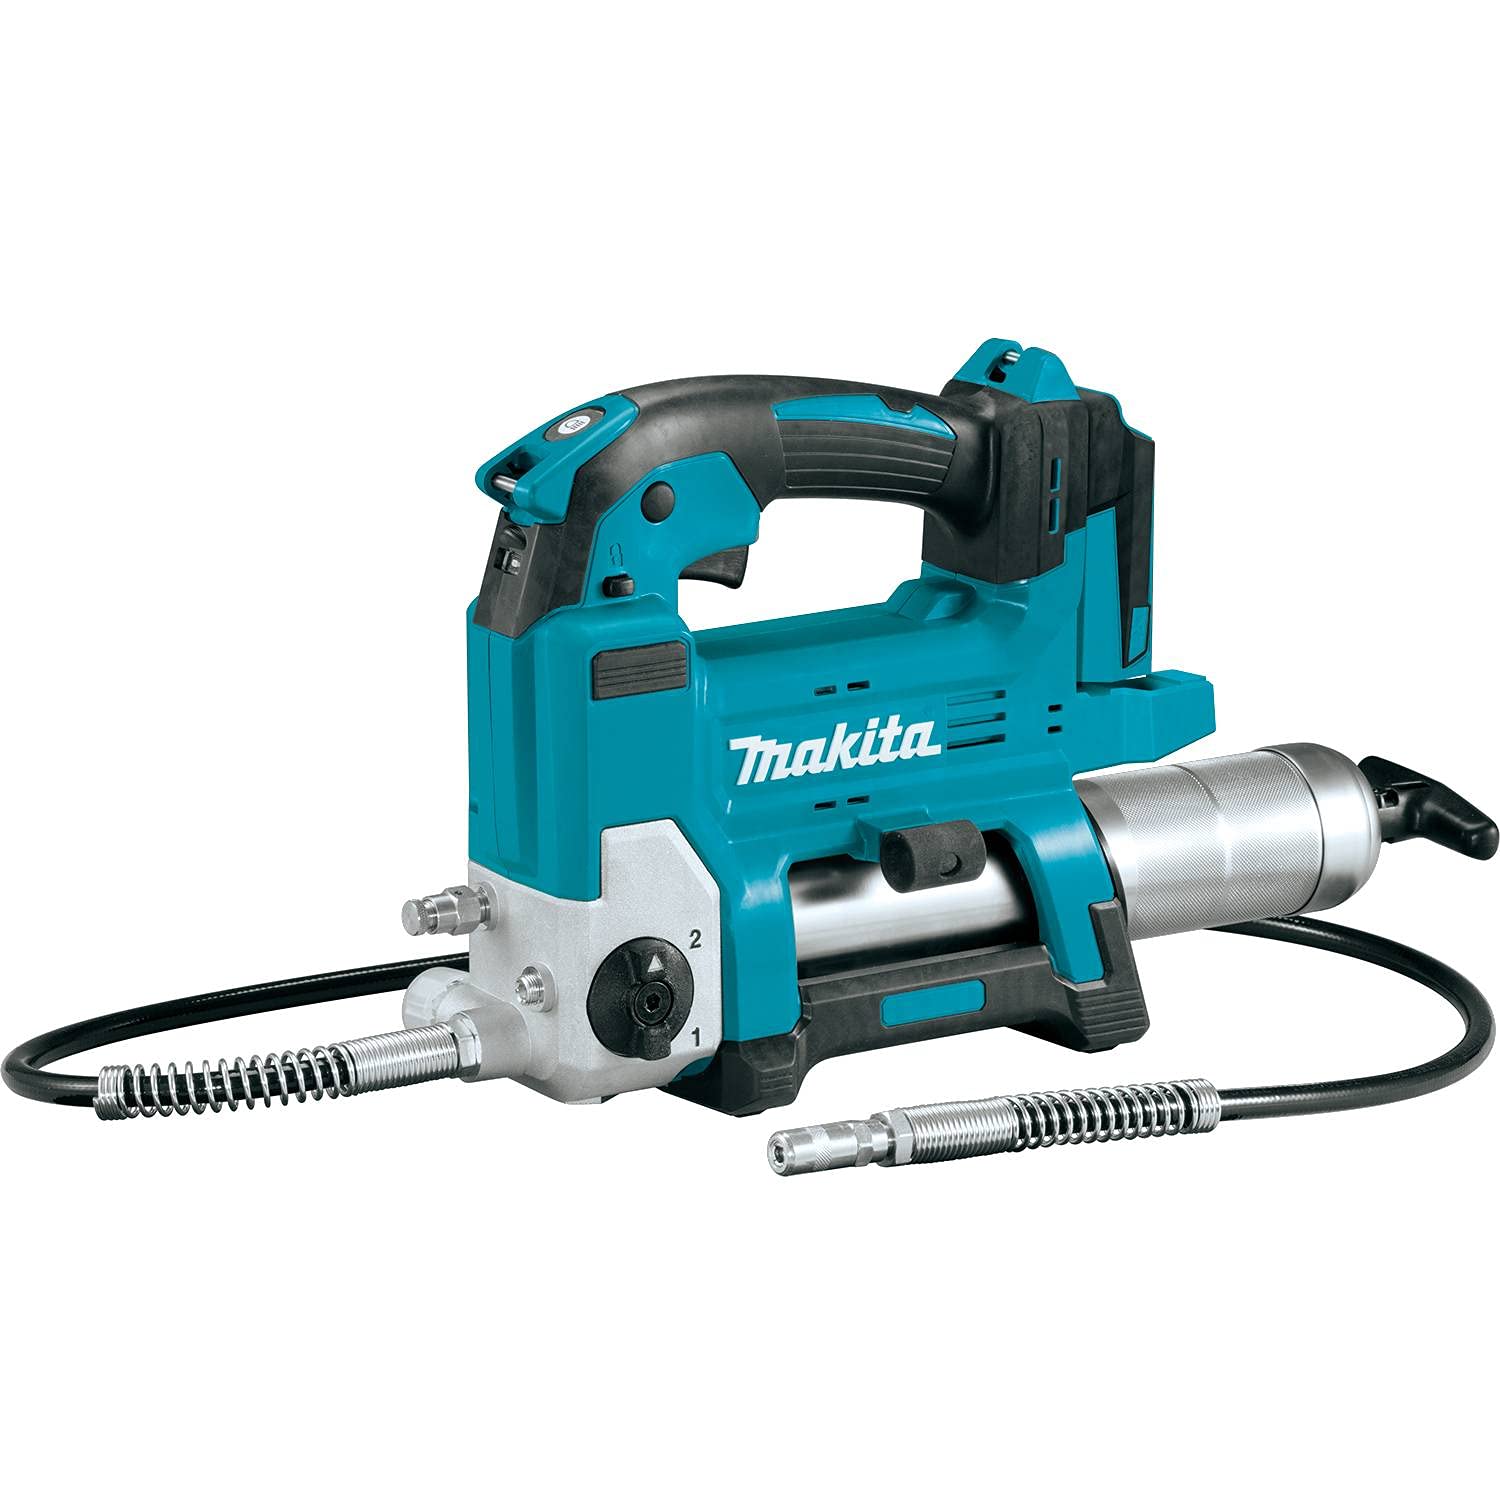 18-Volt Makita LXT Lithium-Ion Cordless Grease Gun (Tool Only) $174 + Free Shipping